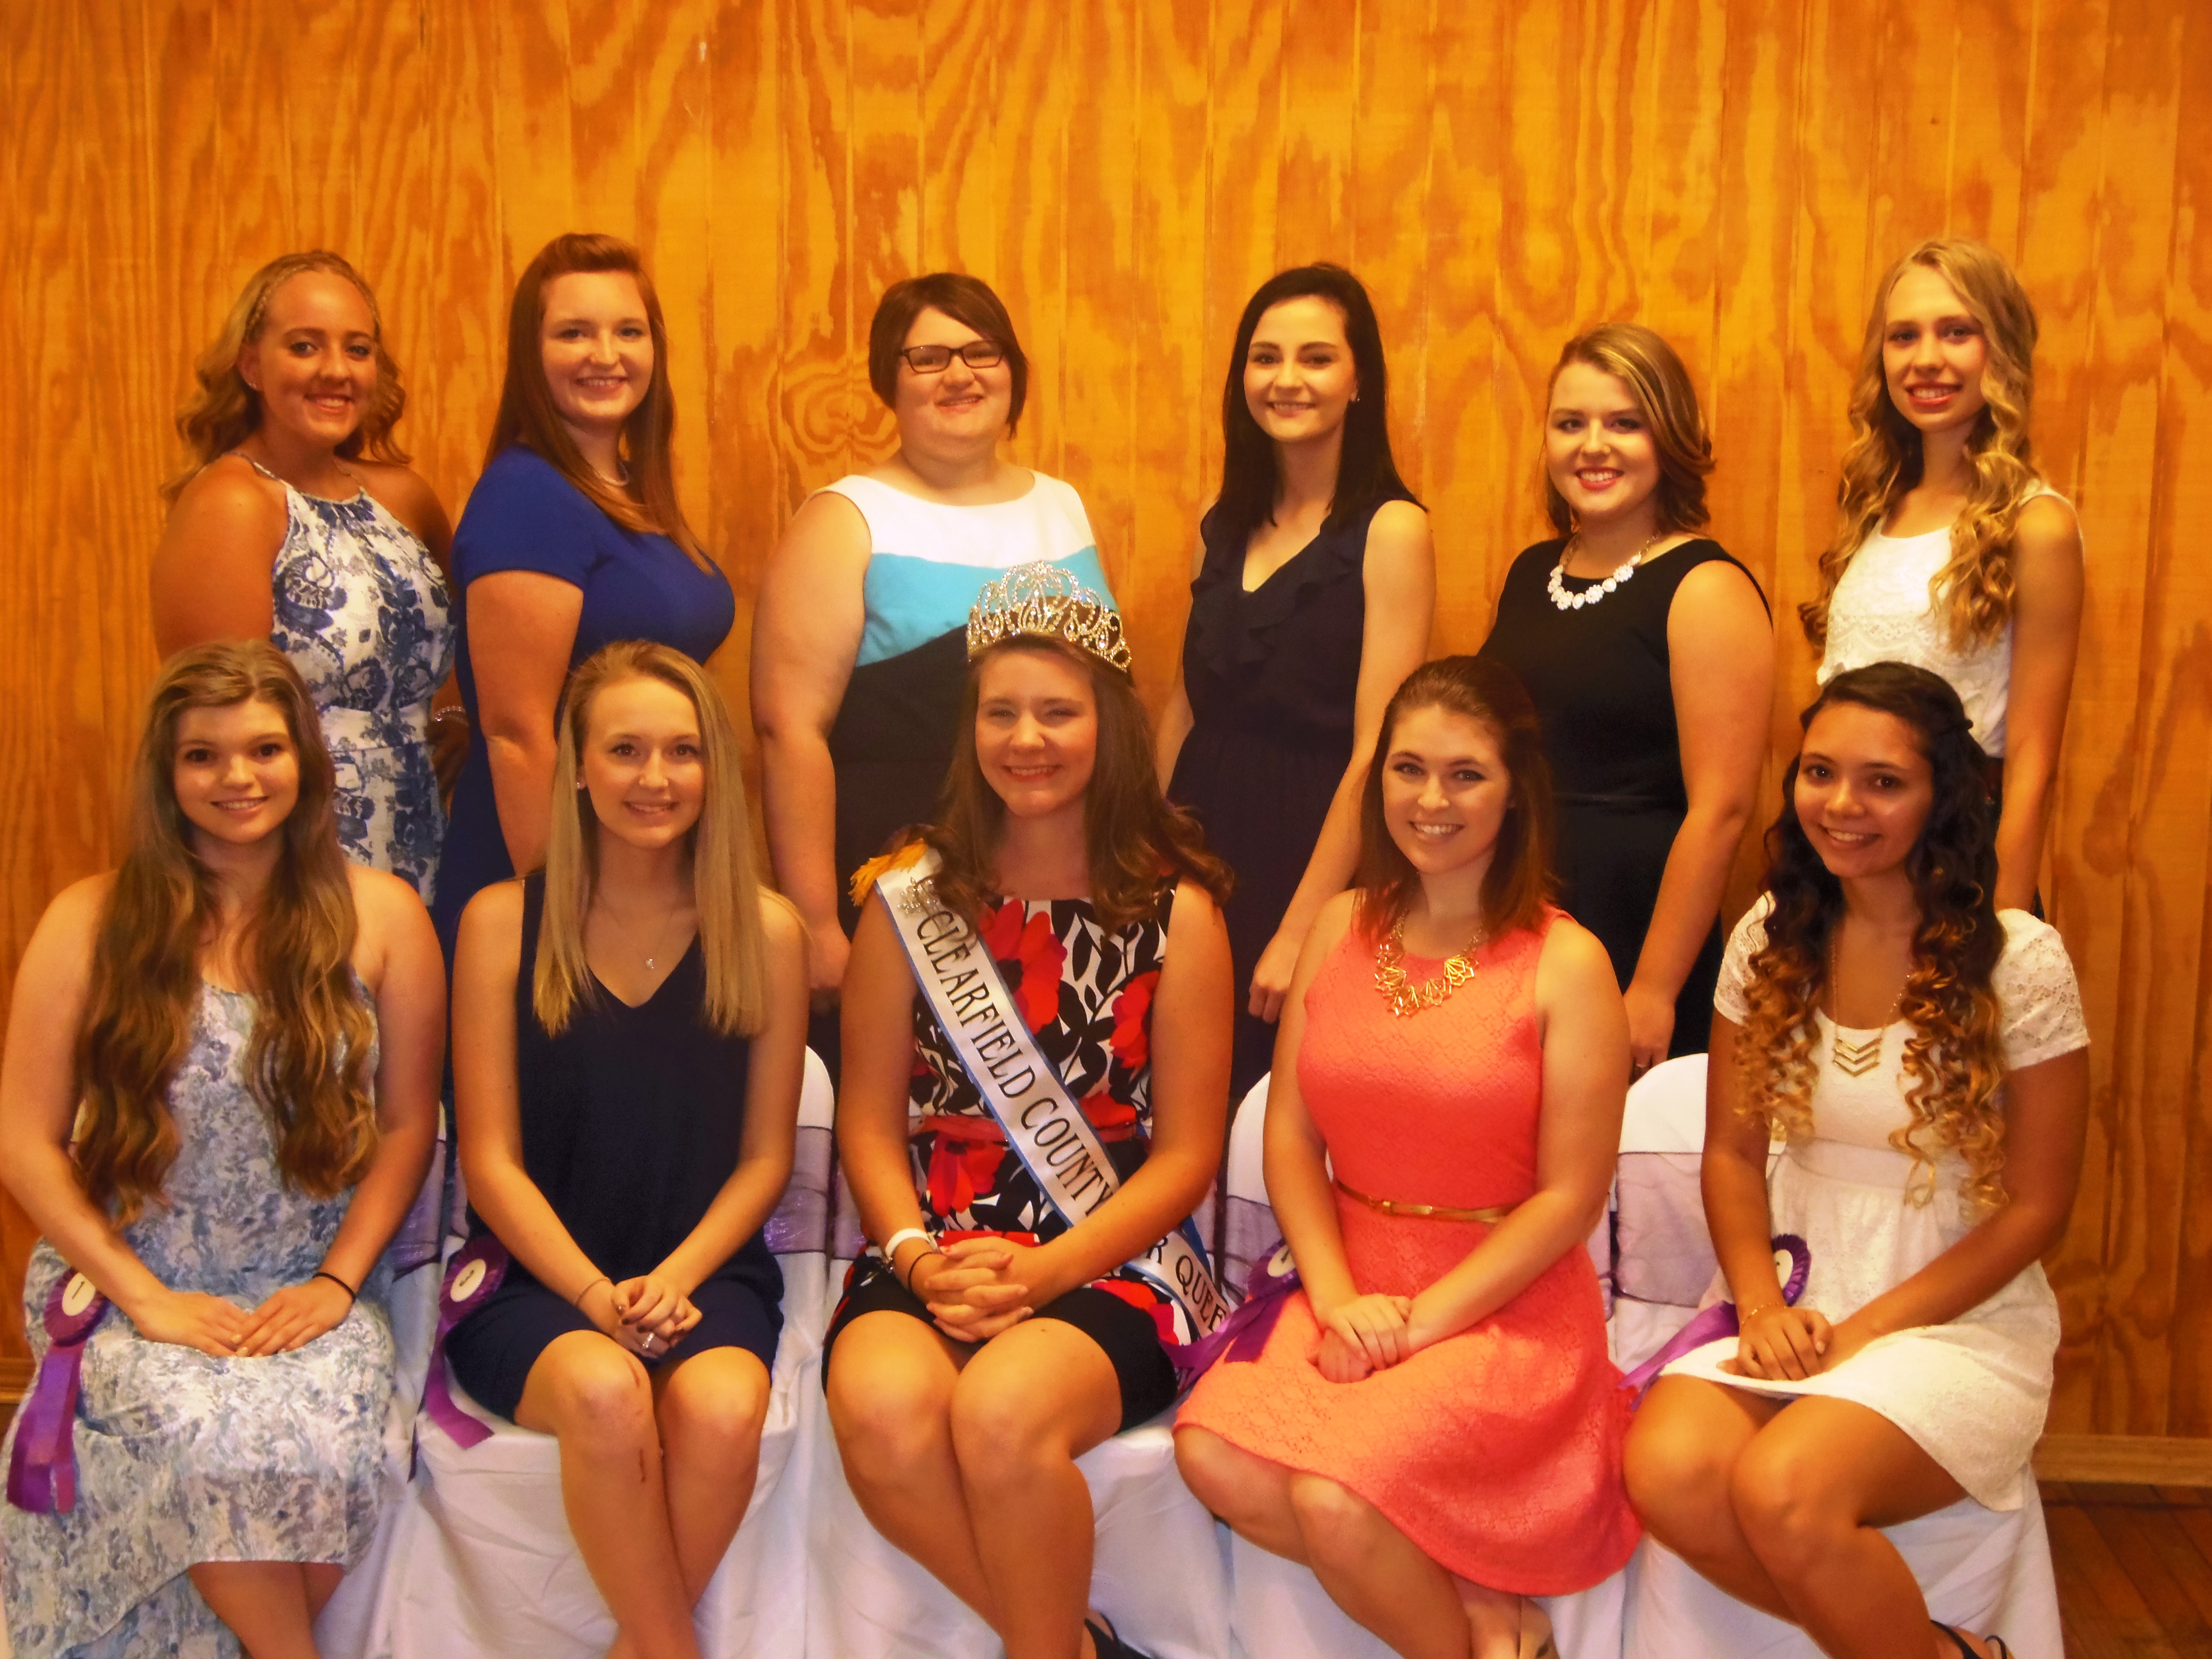 In front, from left, are: Reilly Brown, Madison Havrilesko, Fair Queen Abby Jamison; Rachel Duke; and Diane Thompson. In back are: Haylee Stuckey; Christen Wisor; Ronni Berlin; Hali Murray; Emily Andrulonis; and Cassandra “Cassie” Folmar. Missing from photo is Jayna Vicary. (Photo by Jessica Shirey)